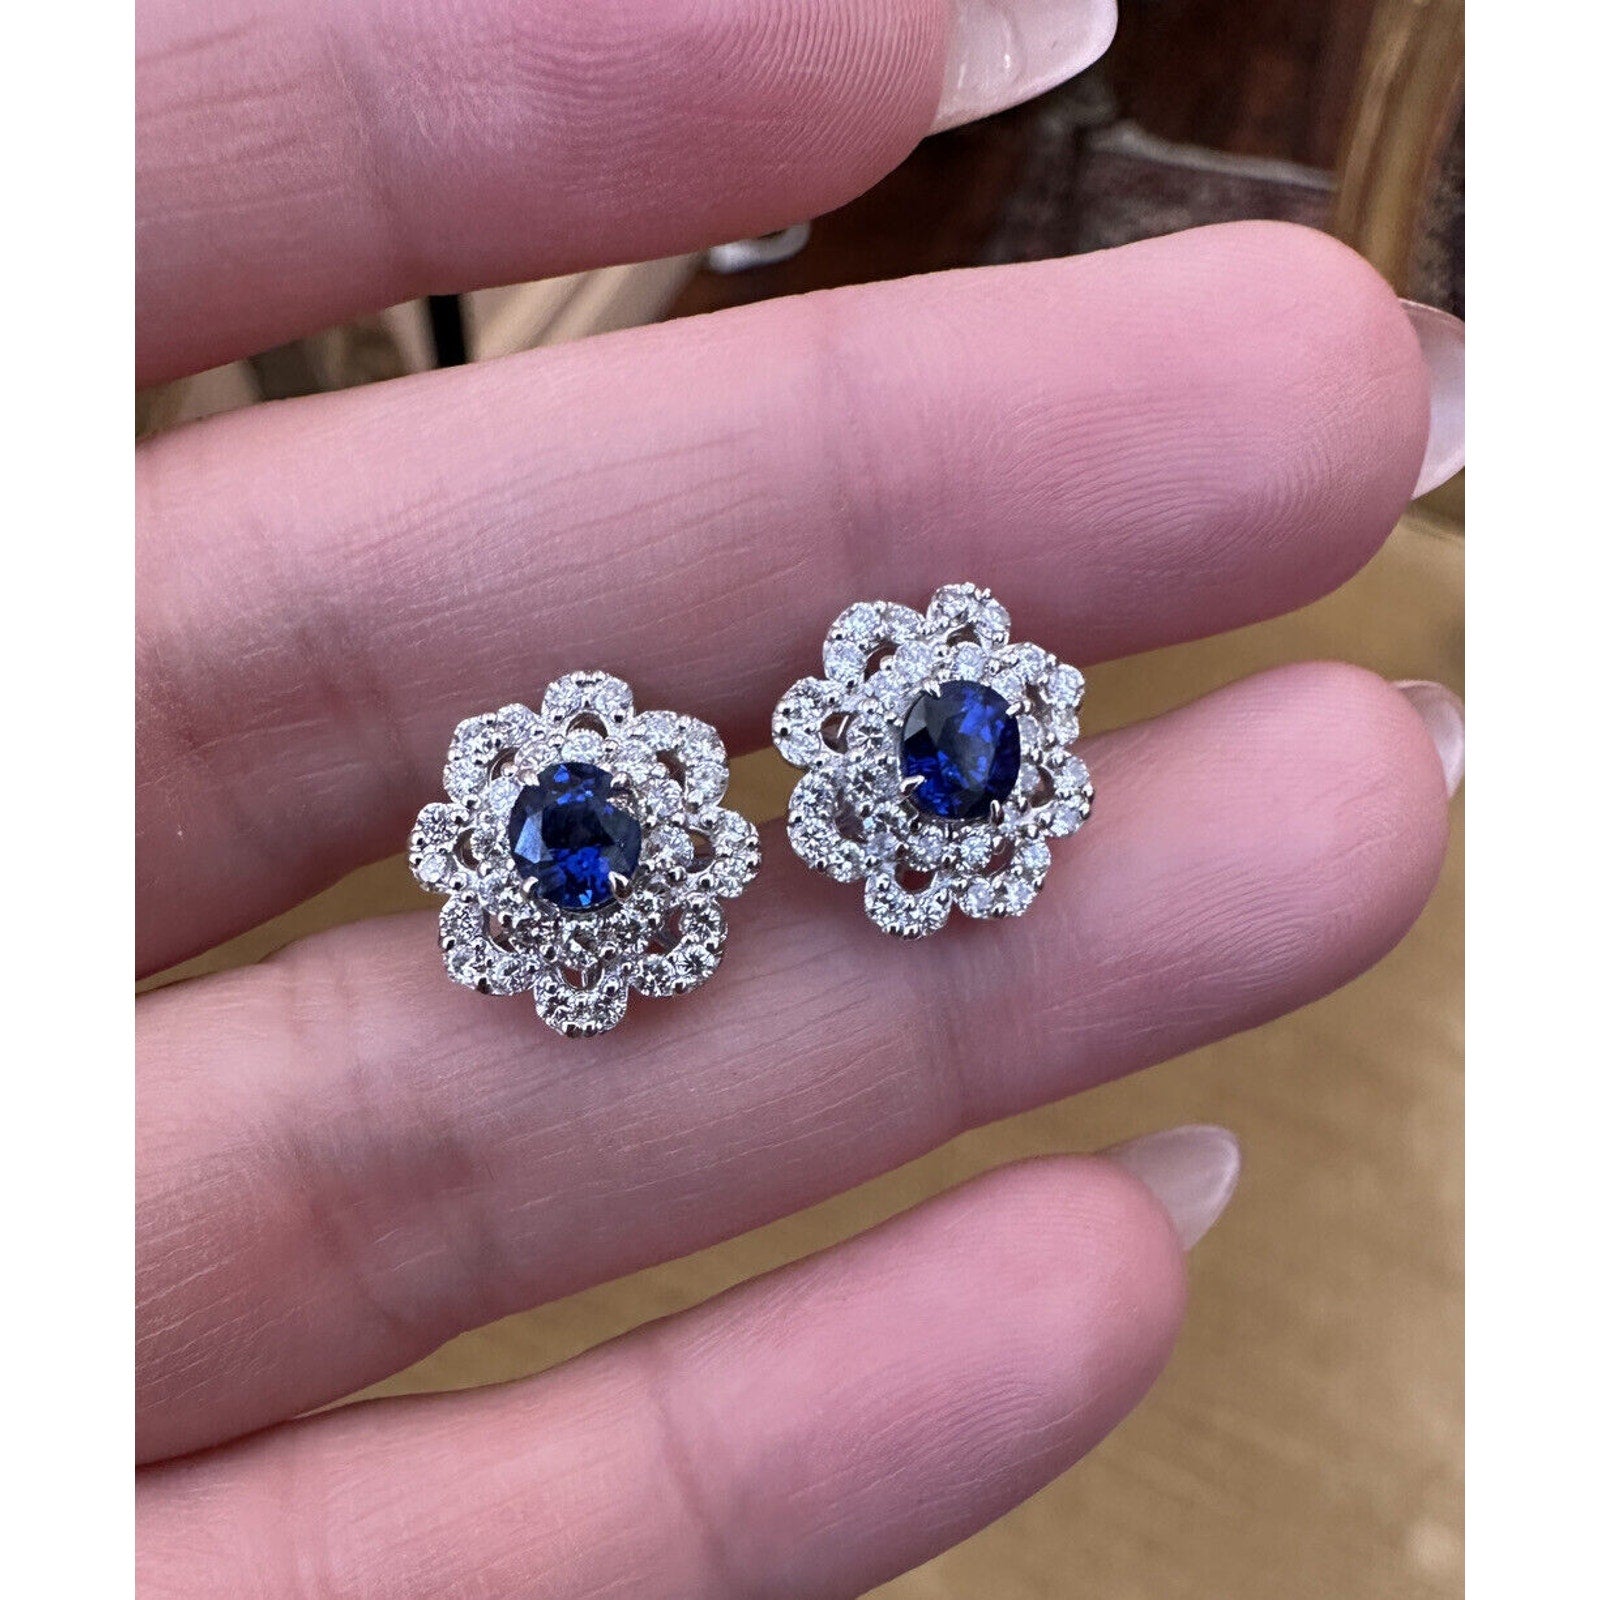 Scalloped Edge Halo Diamond and Sapphire Earrings in Platinum